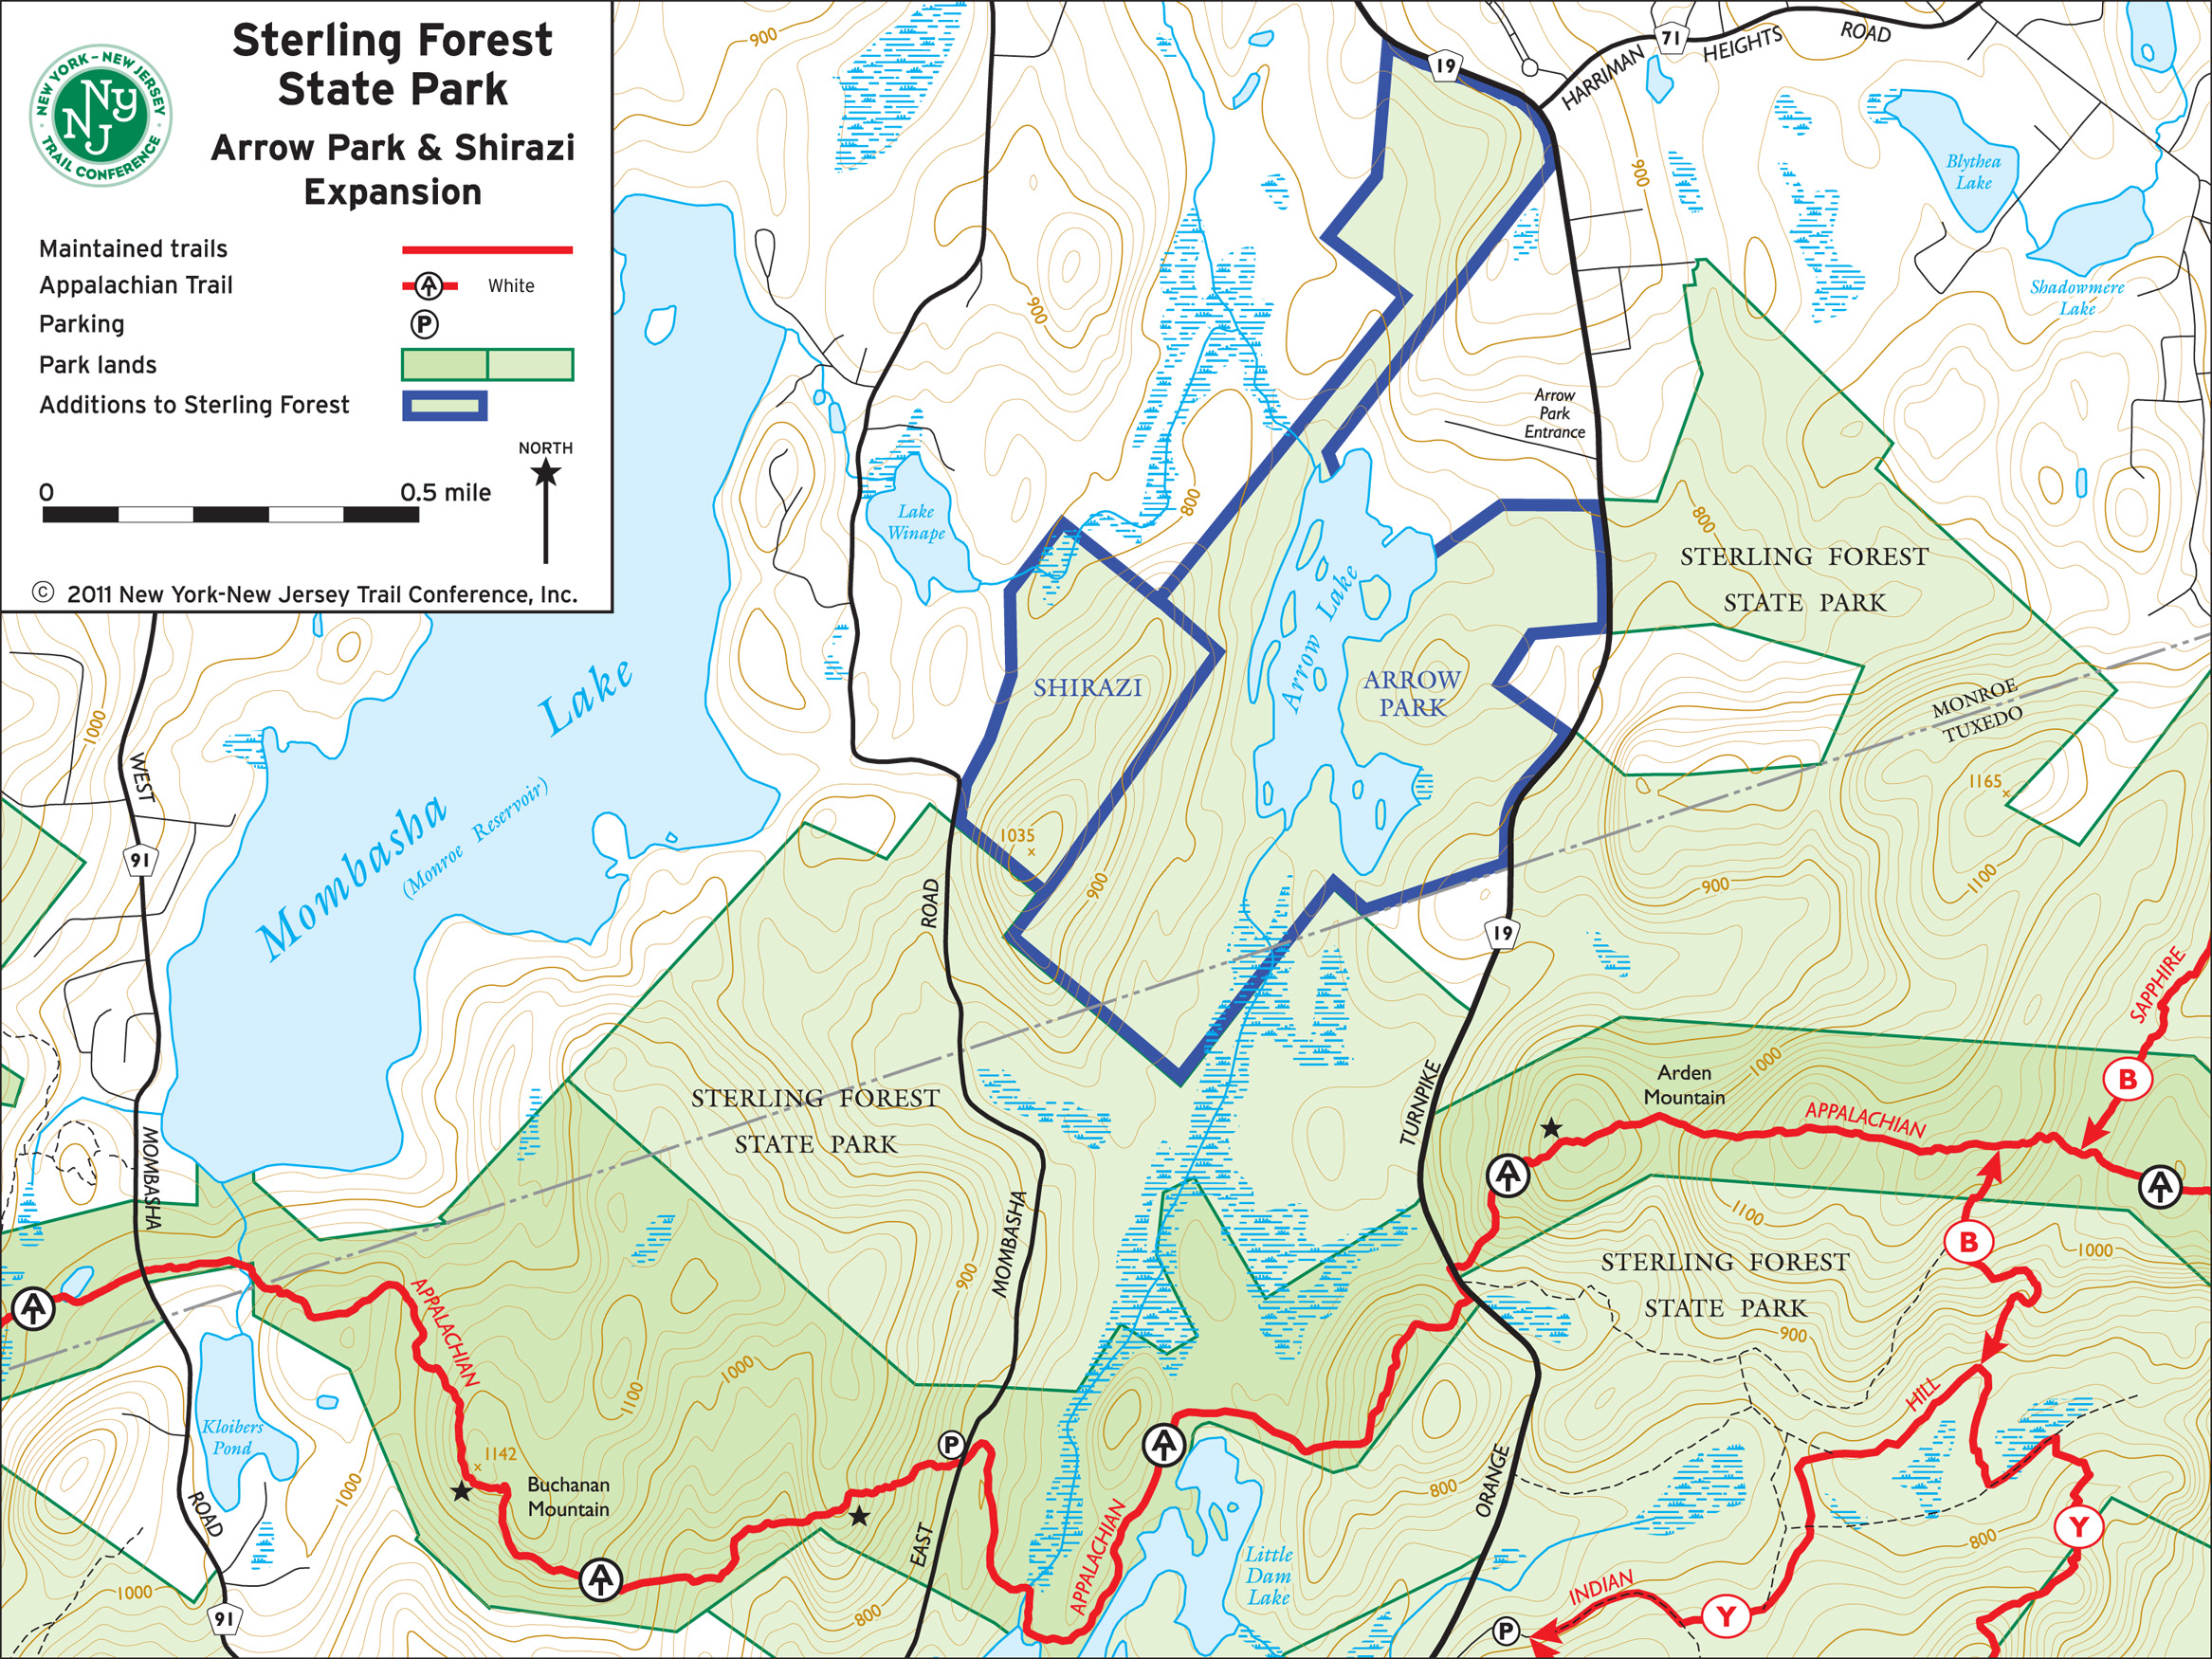 Sterling Forest State Park Trail Map Celebrate Expansion Of Sterling Forest State Park In Monroe, Ny Friday,  September 30 | New York-New Jersey Trail Conference